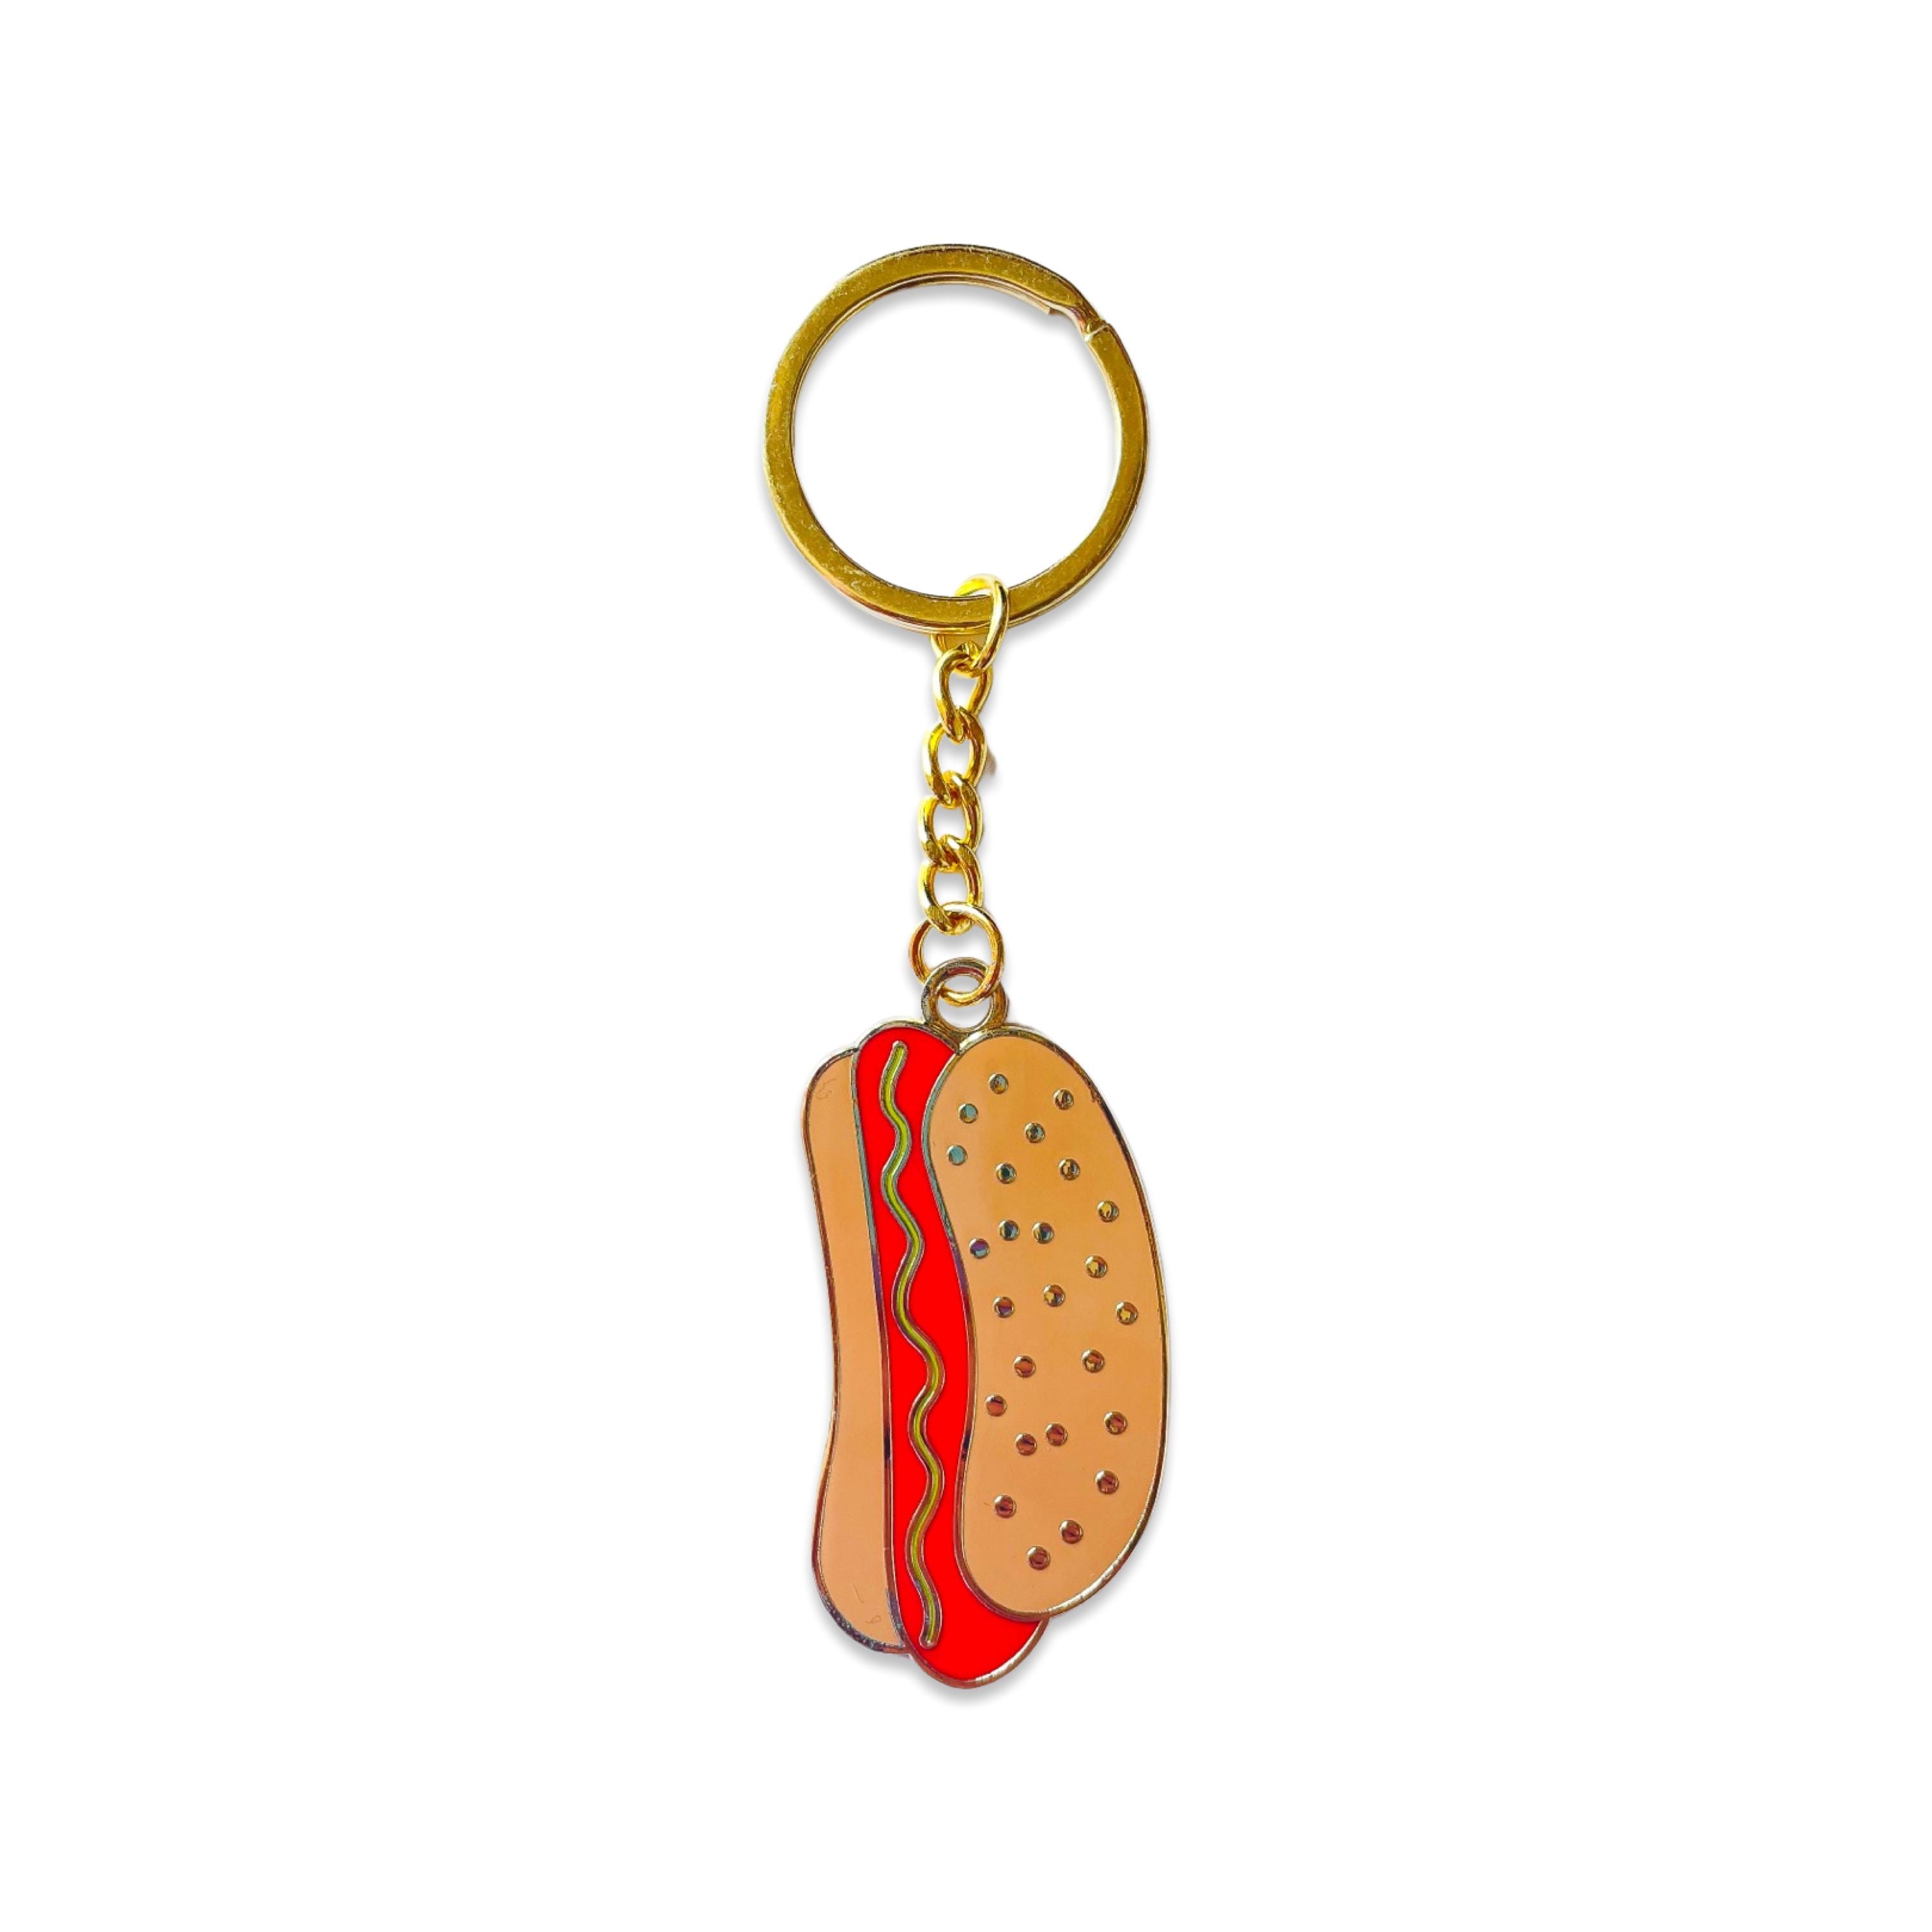 Realistic hot dog on a keychain - a keychain with food - gift idea